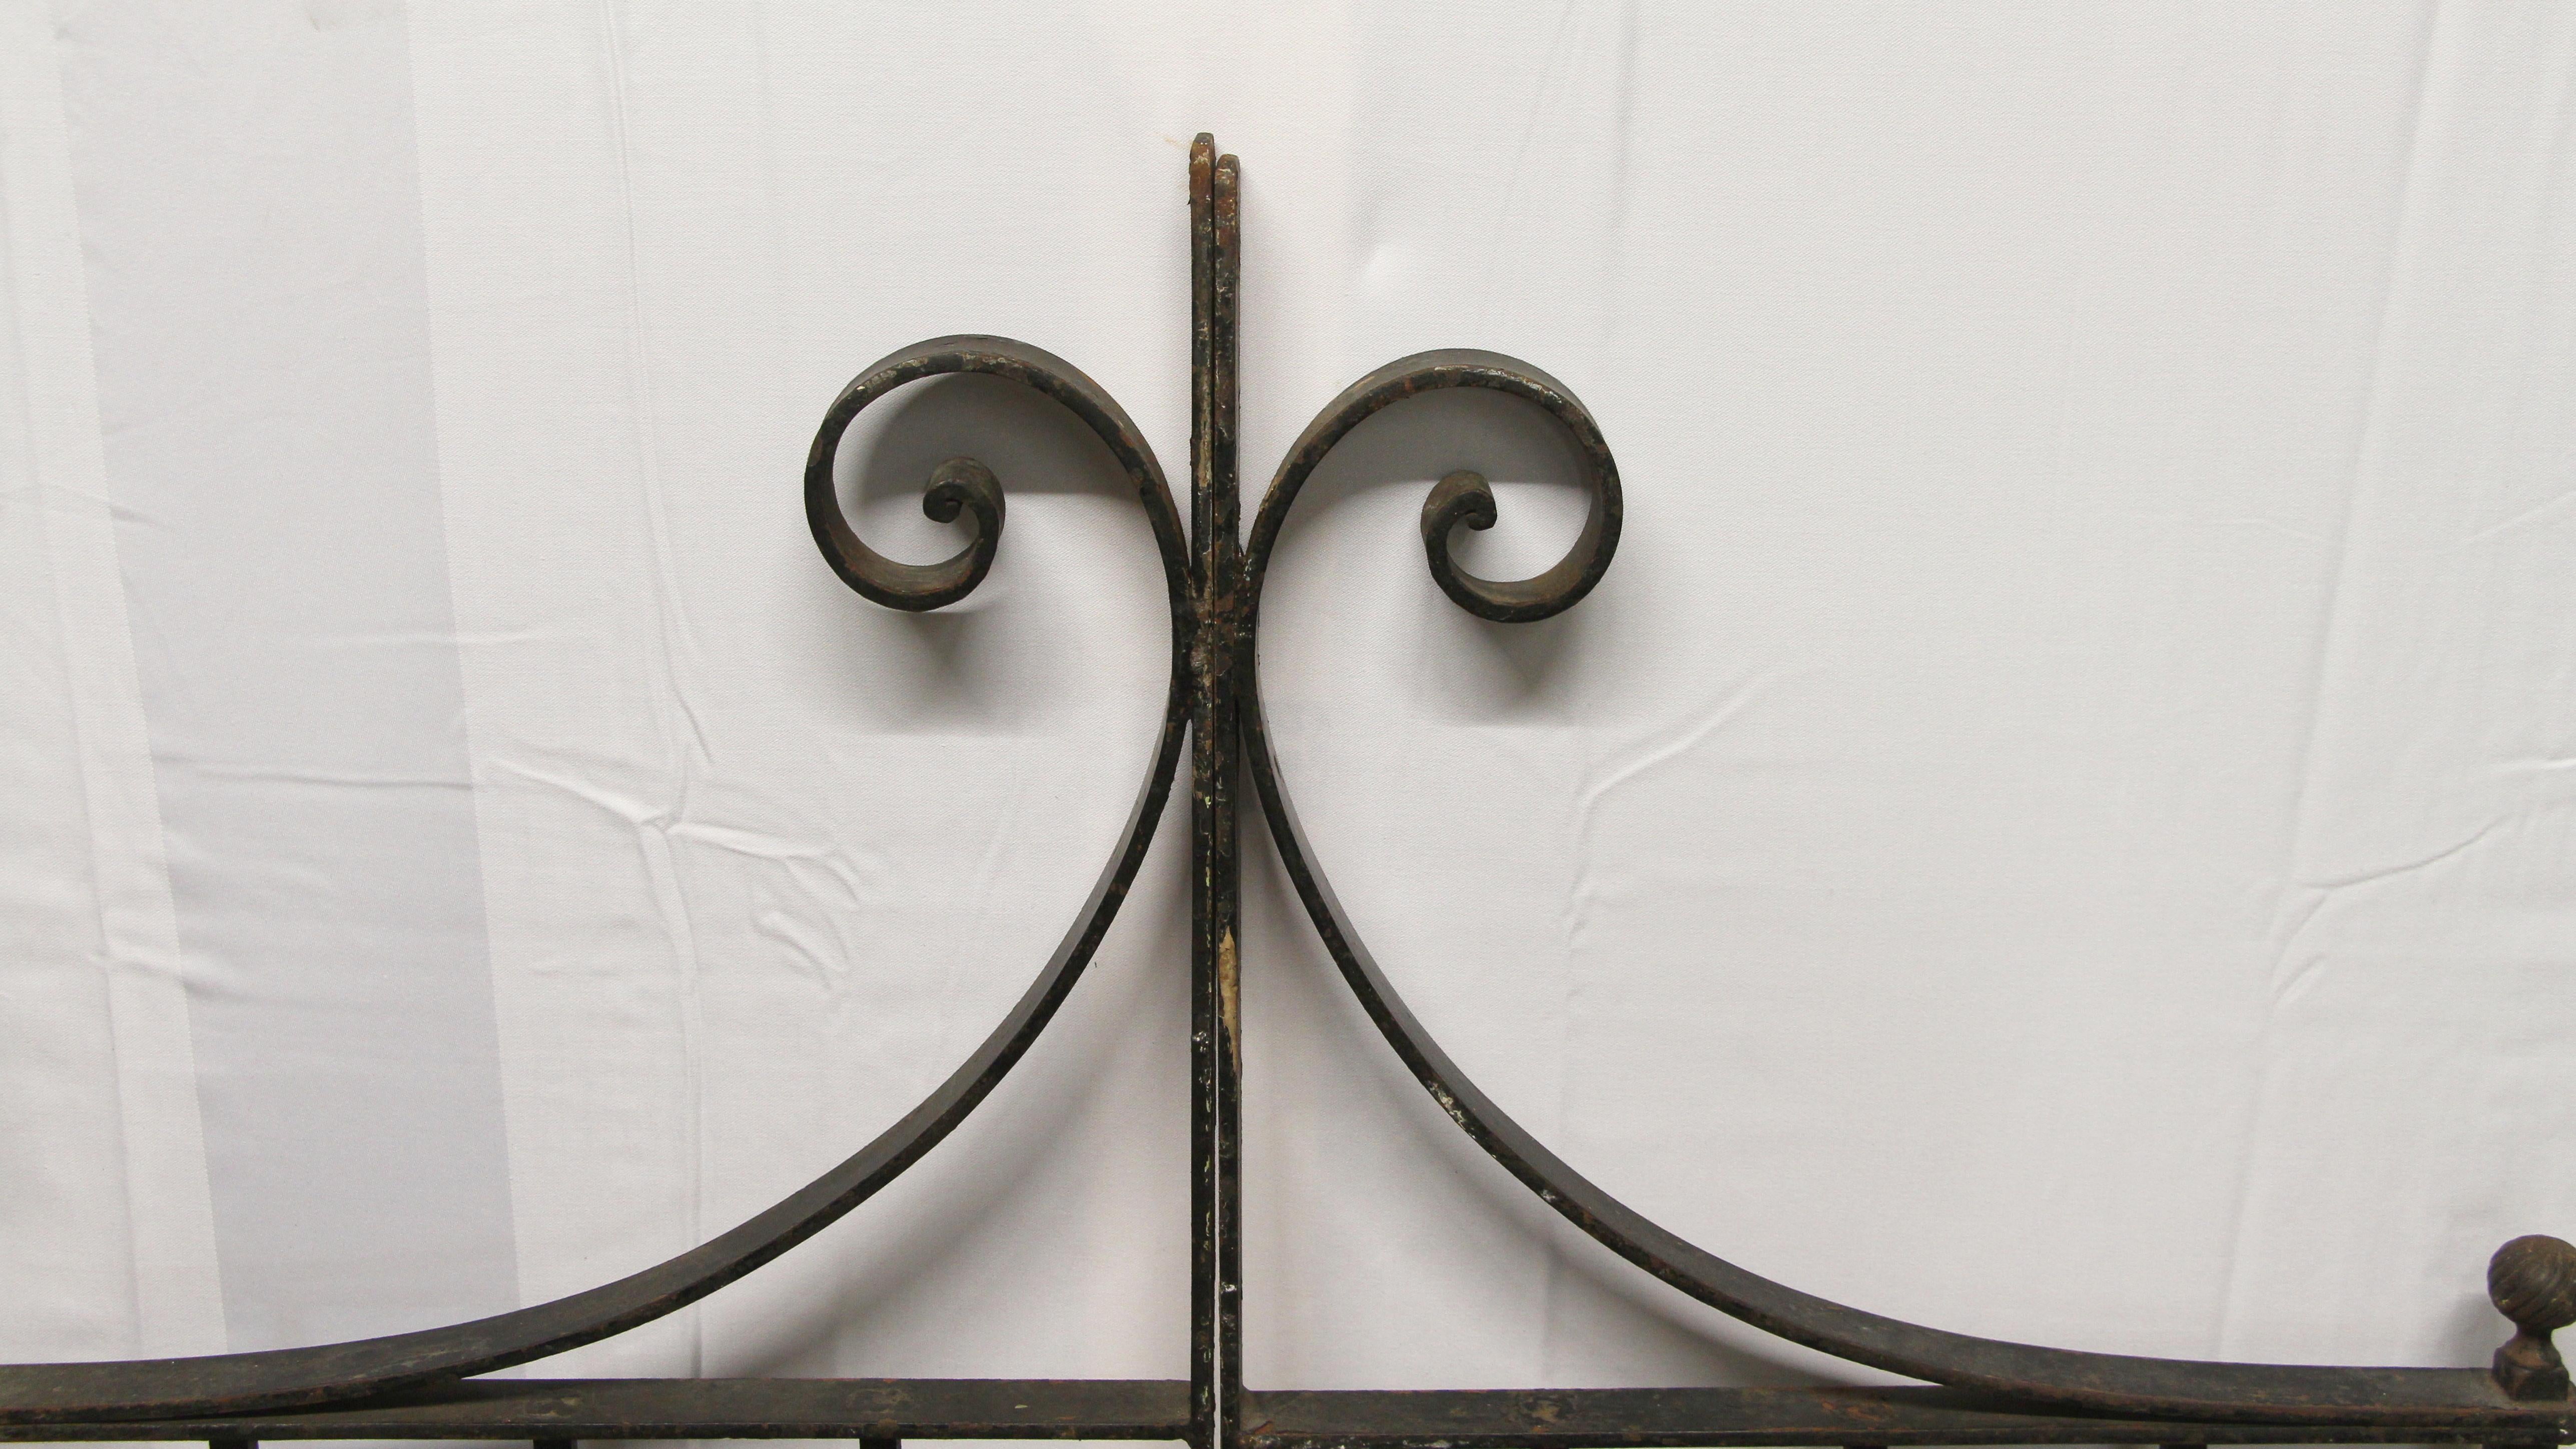 Simple forged iron double garden gate set with an old black finish. The surface is worn and will need refinishing. Center scroll design, circa 1940. Sold as a pair. This can be viewed at our Scranton, Pennsylvania location. Please inquire for the